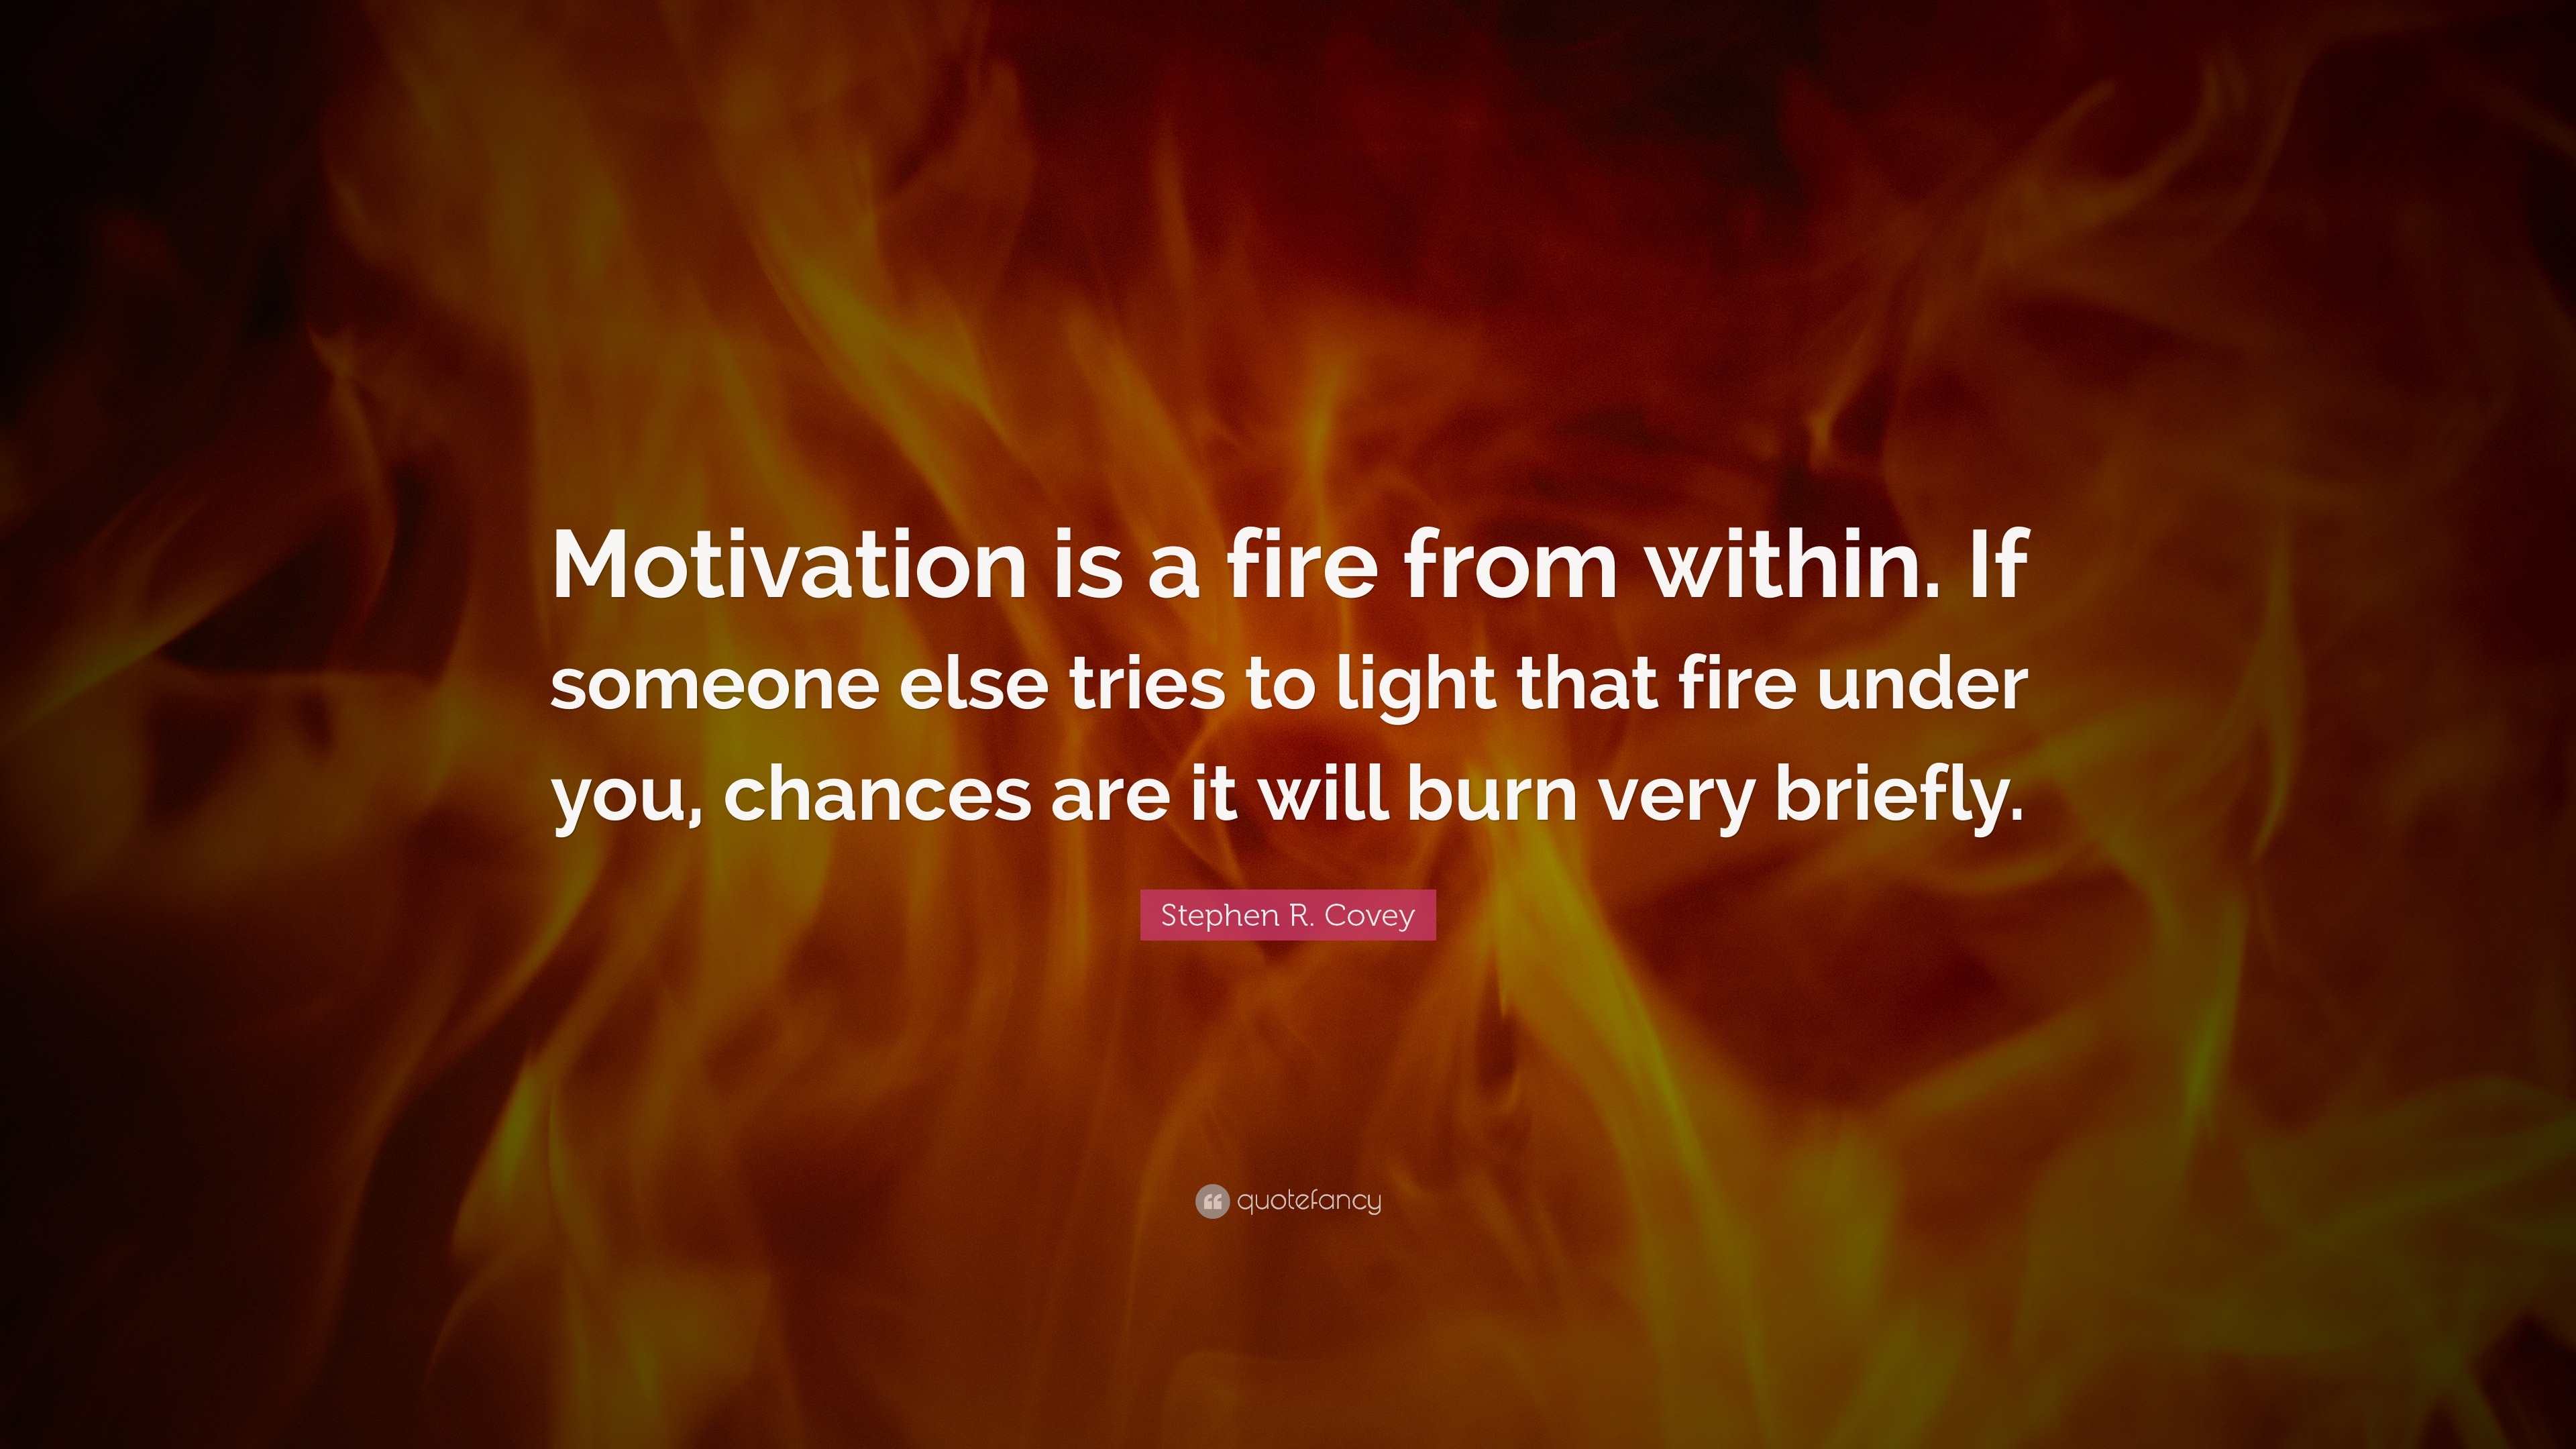 Stephen R. Covey Quotes (100 wallpapers) - Quotefancy